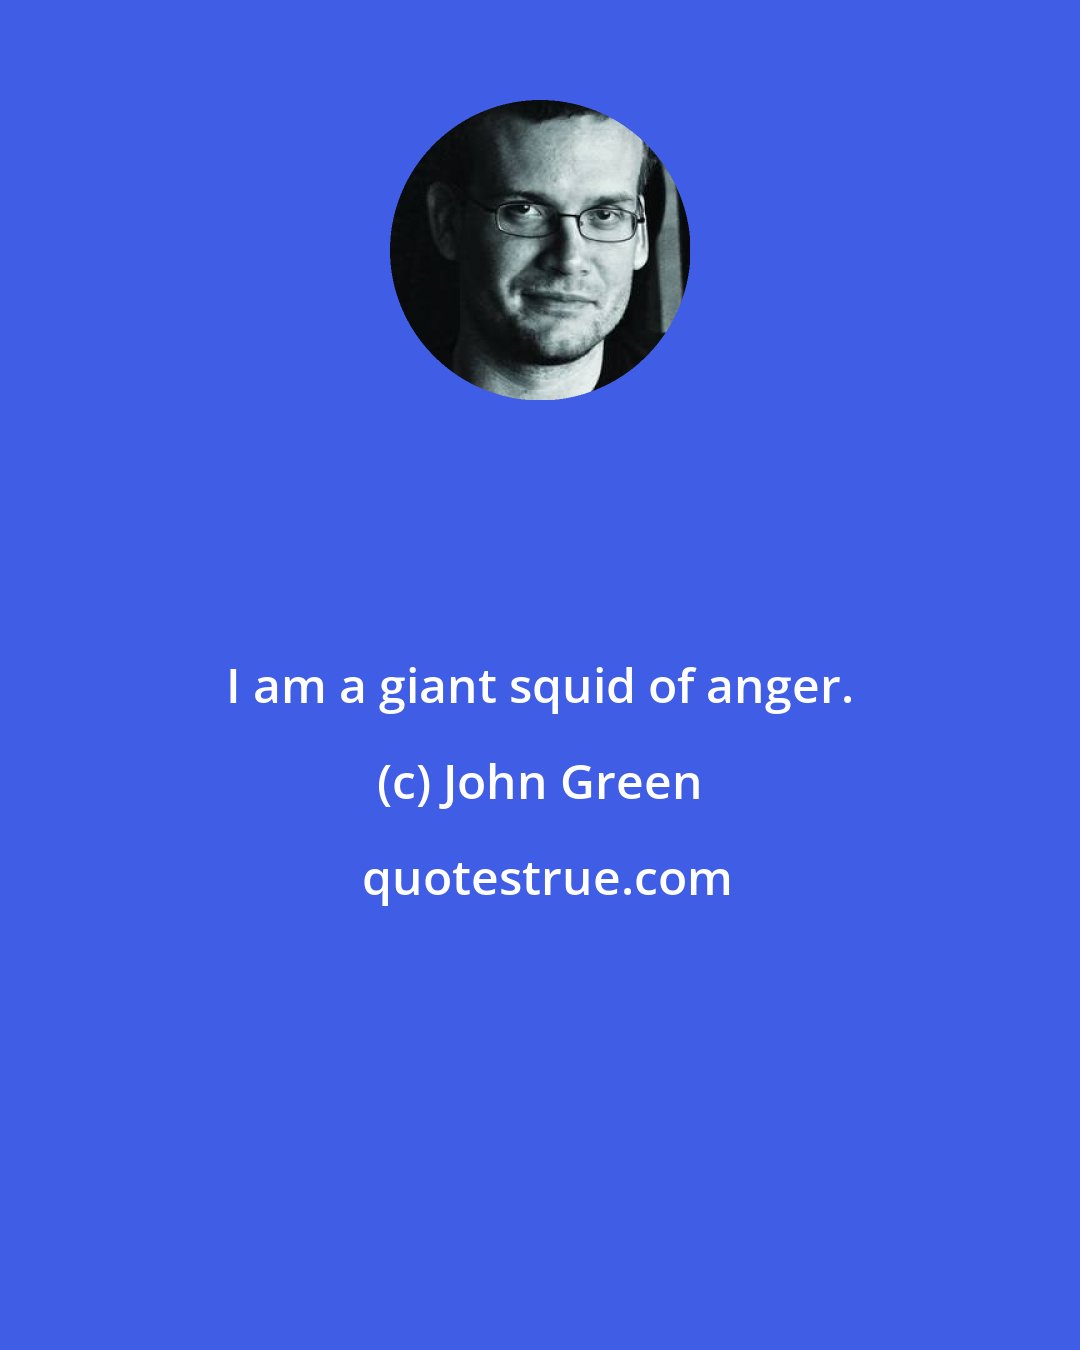 John Green: I am a giant squid of anger.